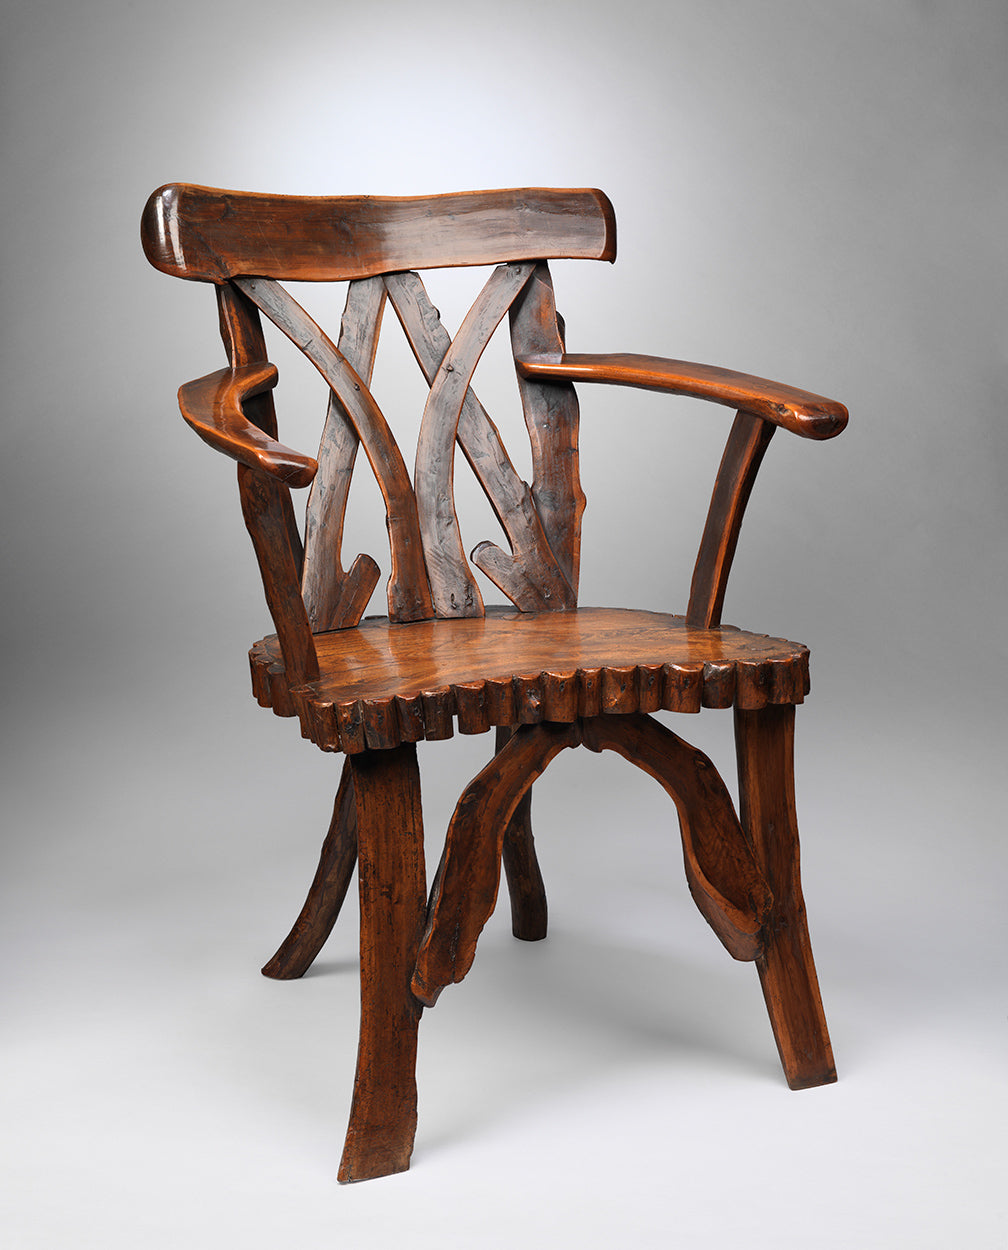 Remarkable Vernacular Windsor "Grotto" Chair